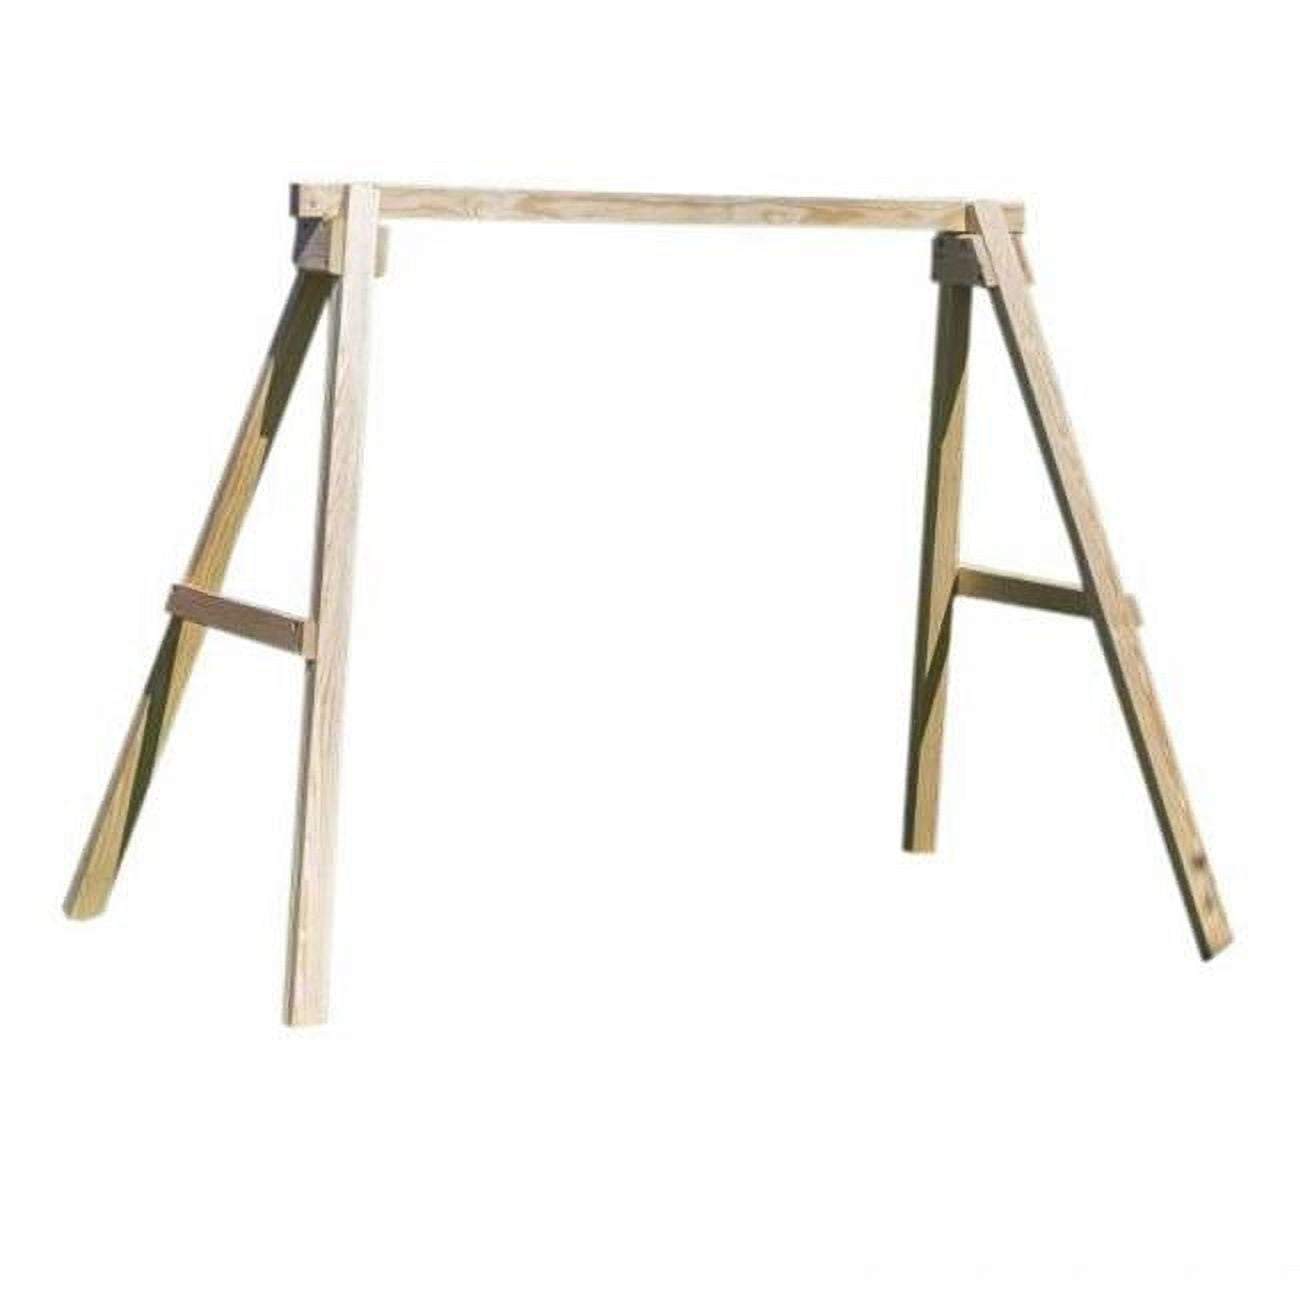 Picture of Creekvine Designs FAF4A5-2CVD 4 x 5 ft. 4 x 4 Post Treated Pine Swing Stand